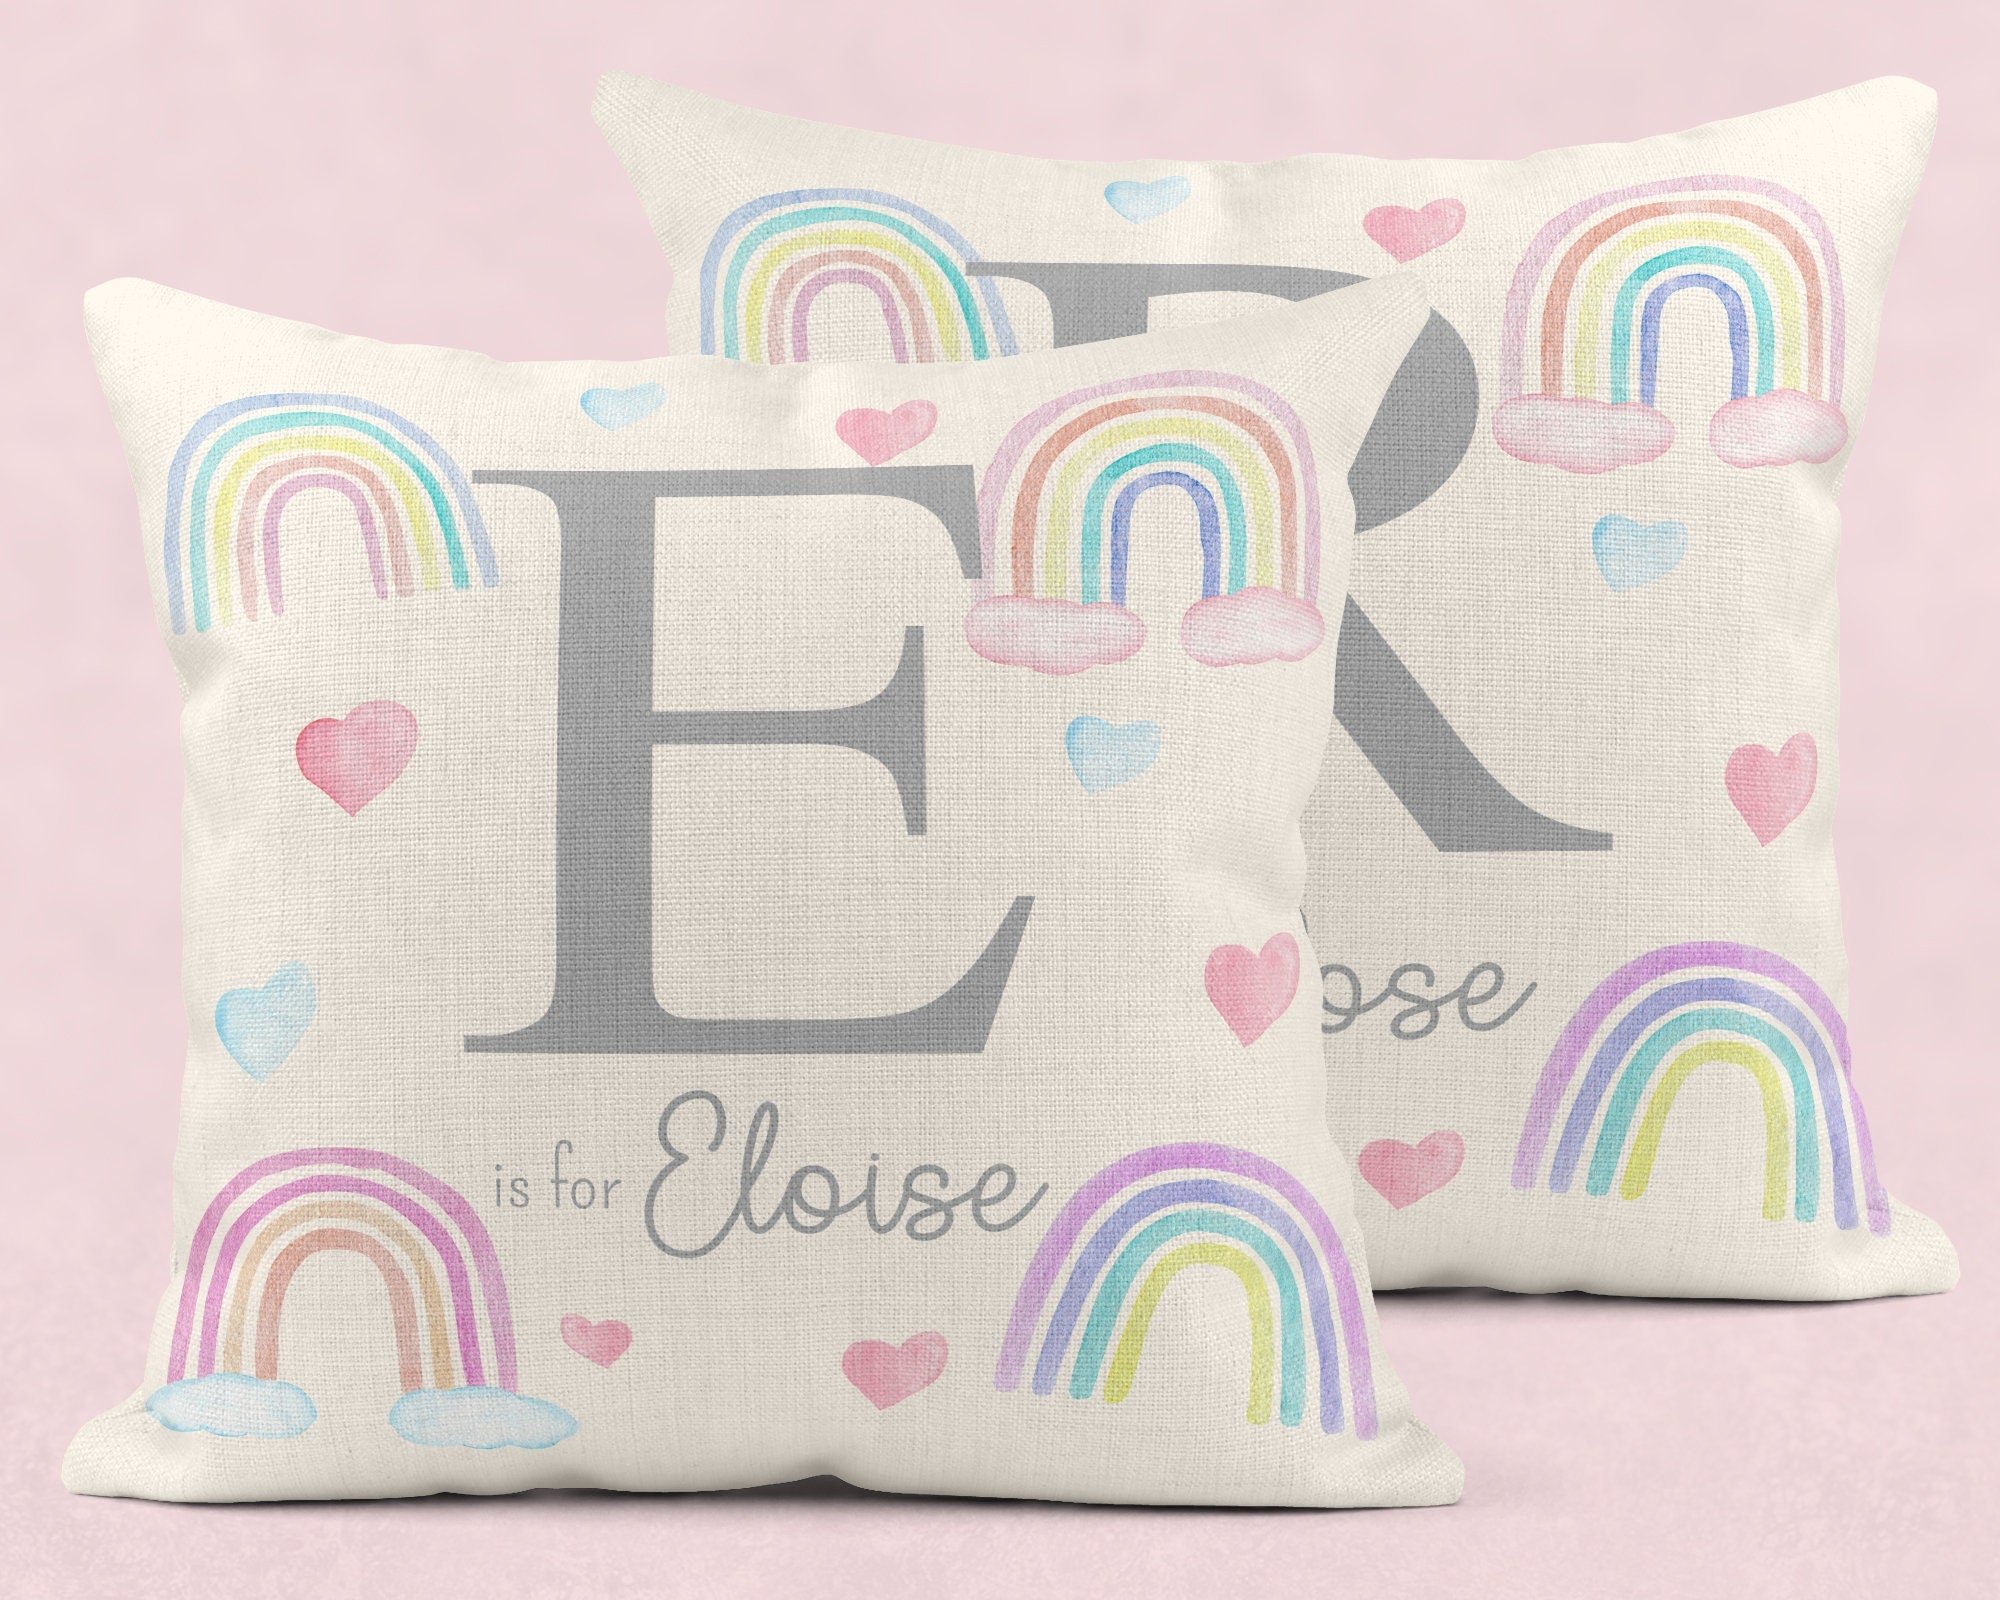 Personalised New Baby Cushion, Welcome To The World Cushion, New Baby Gifts, Rainbow Cushion, New Baby Present, Rainbow Nursery Decor